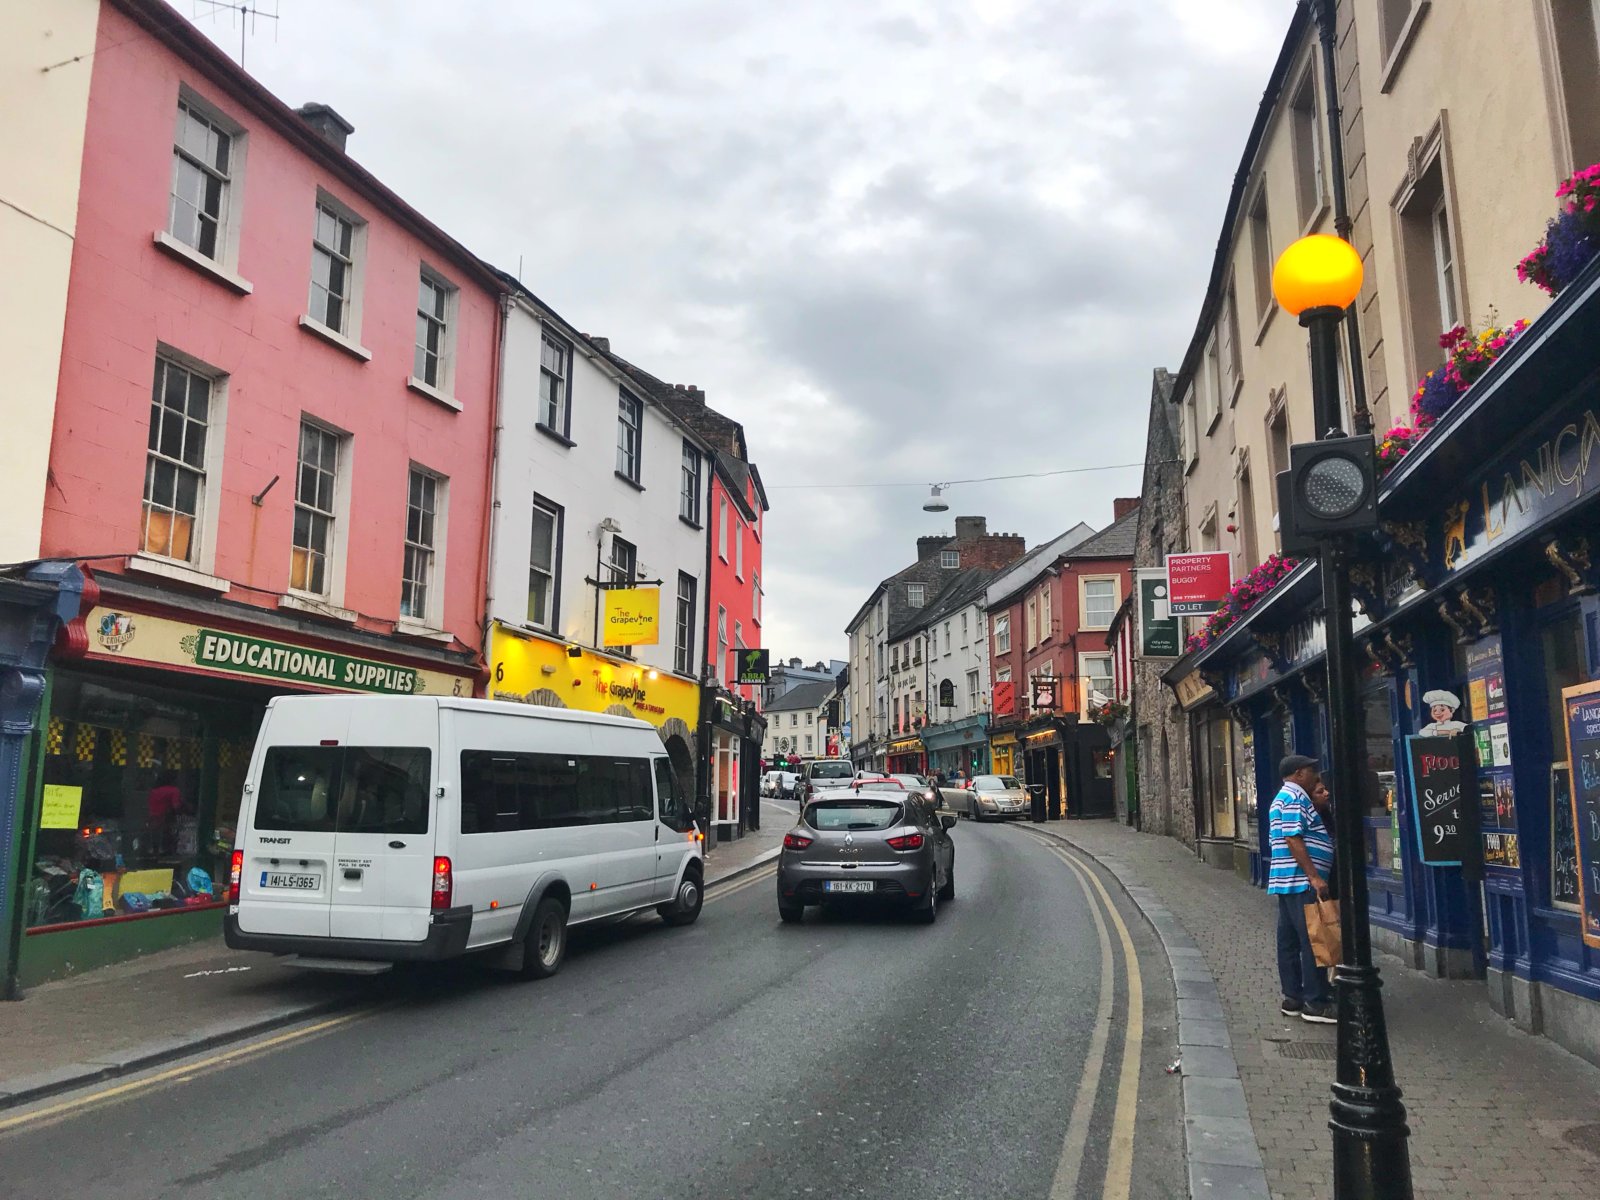 What to do in Kilkenny